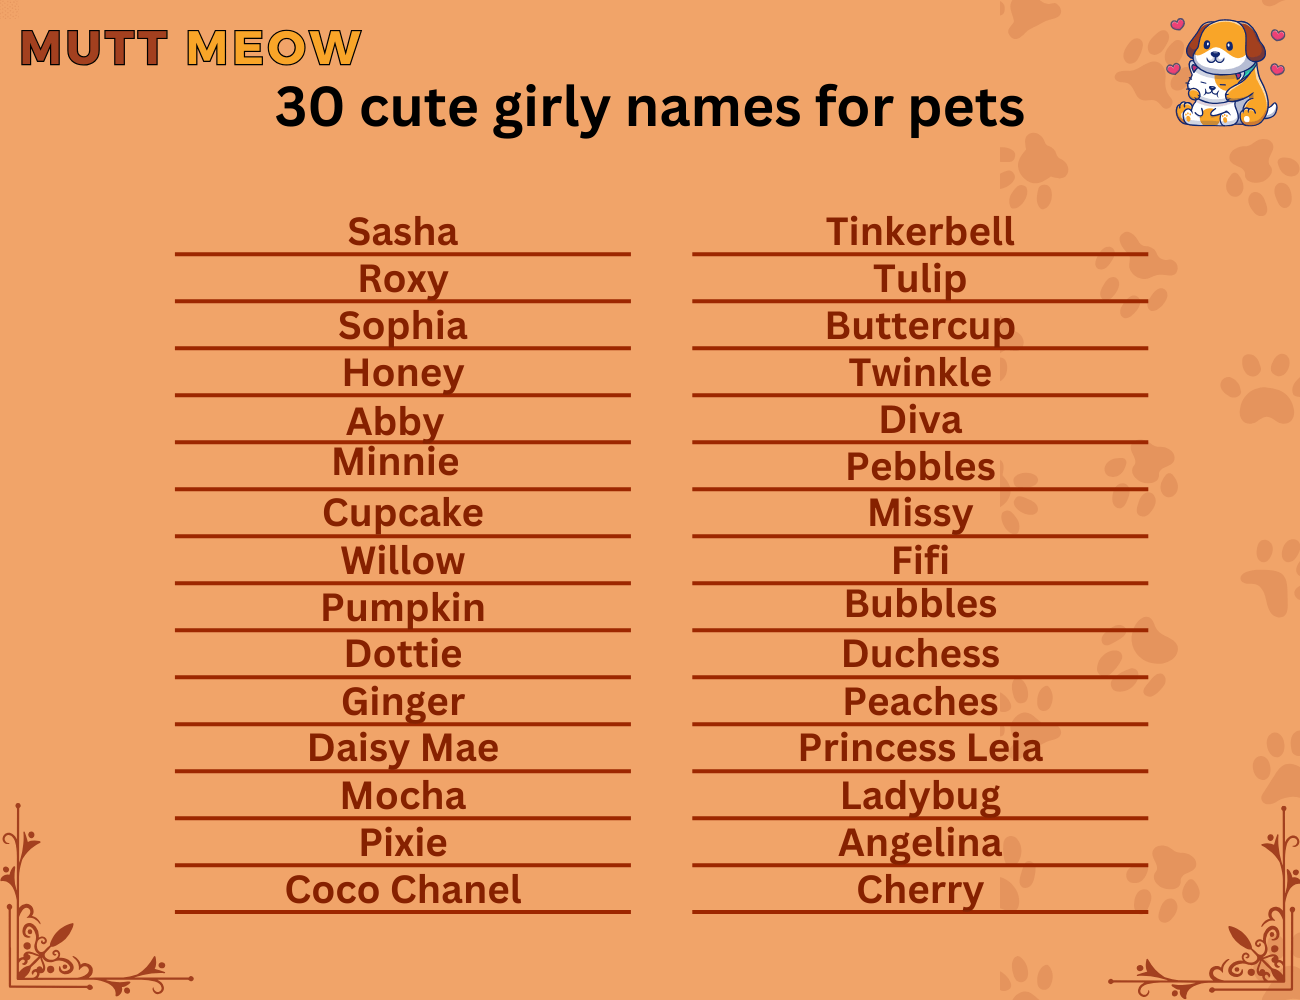 30 cute girly names for pets